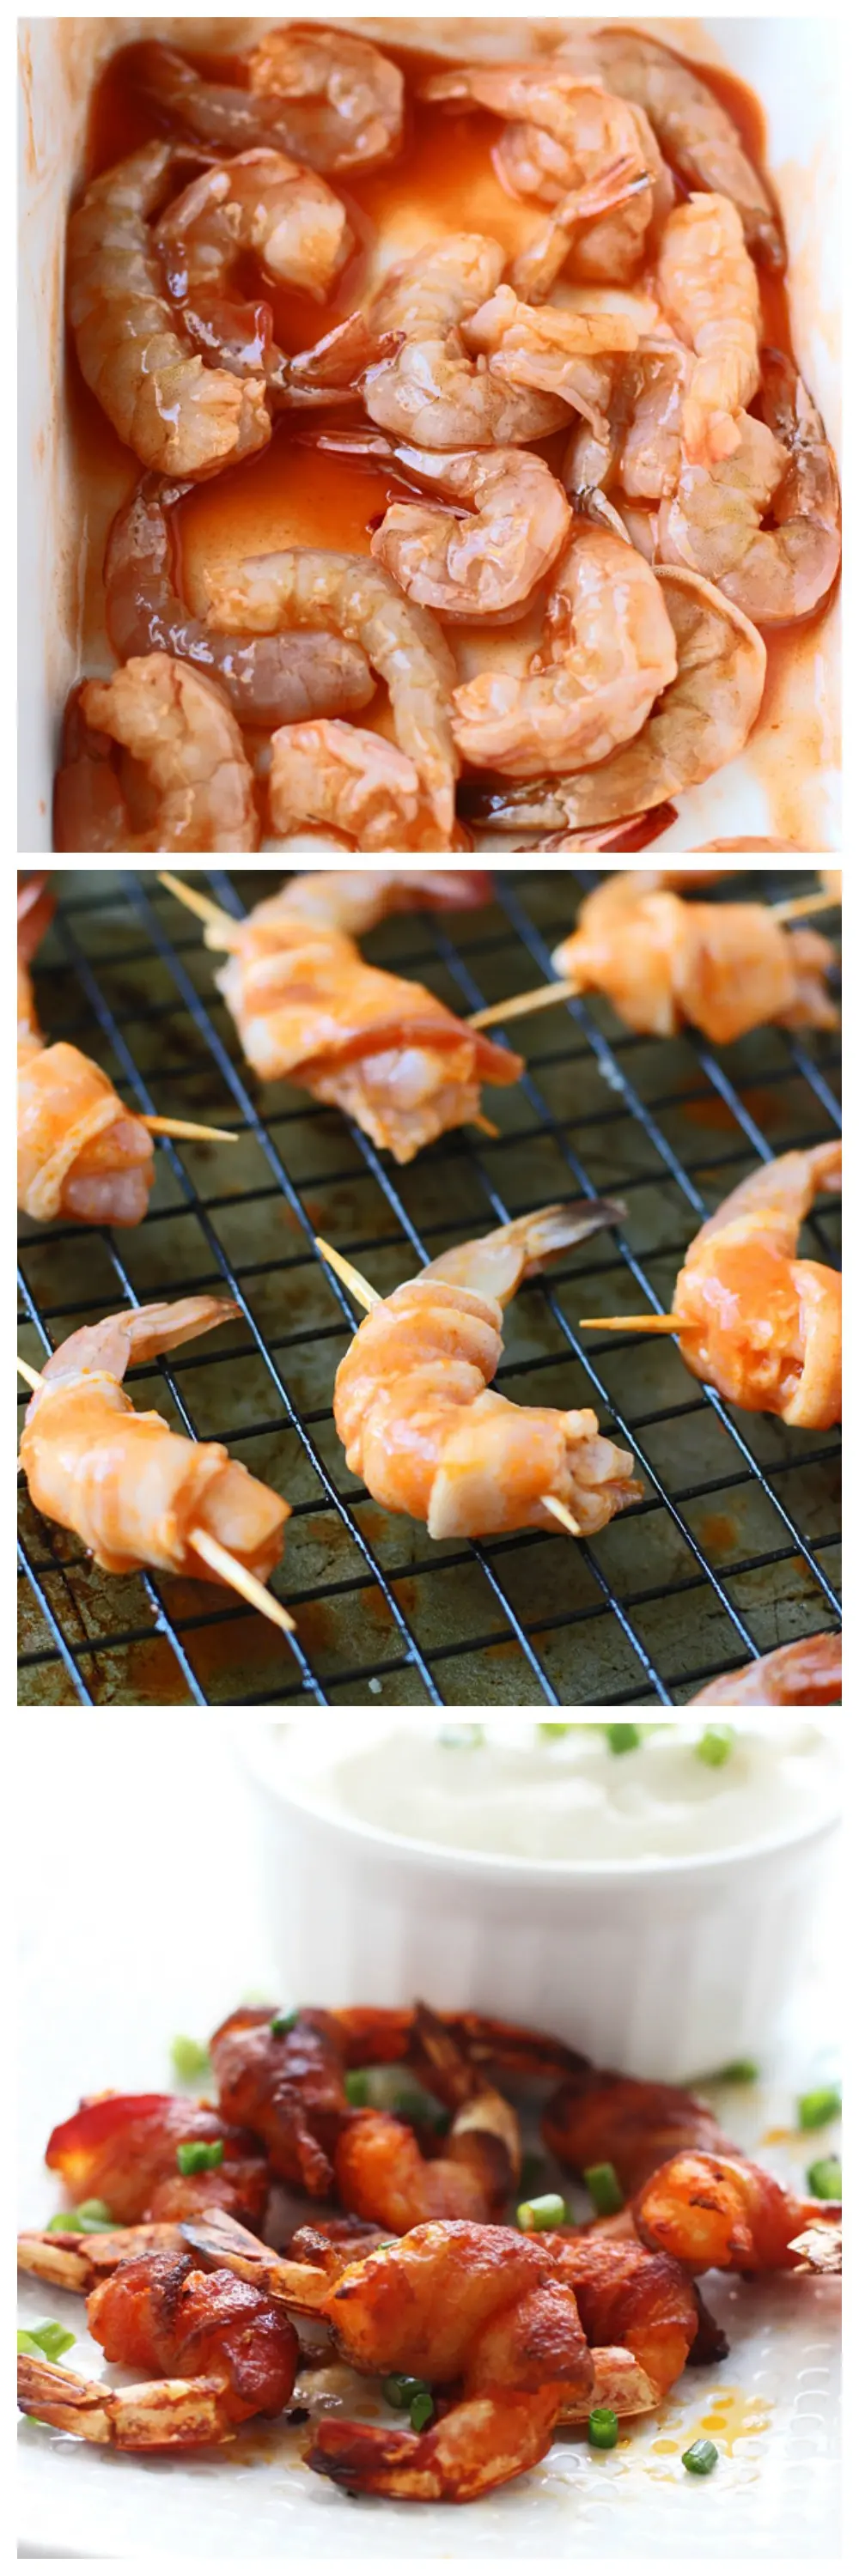 3 Ingredient Bacon Wrapped Buffalo Shrimp | Cooking for Keeps @cookingforkeeps